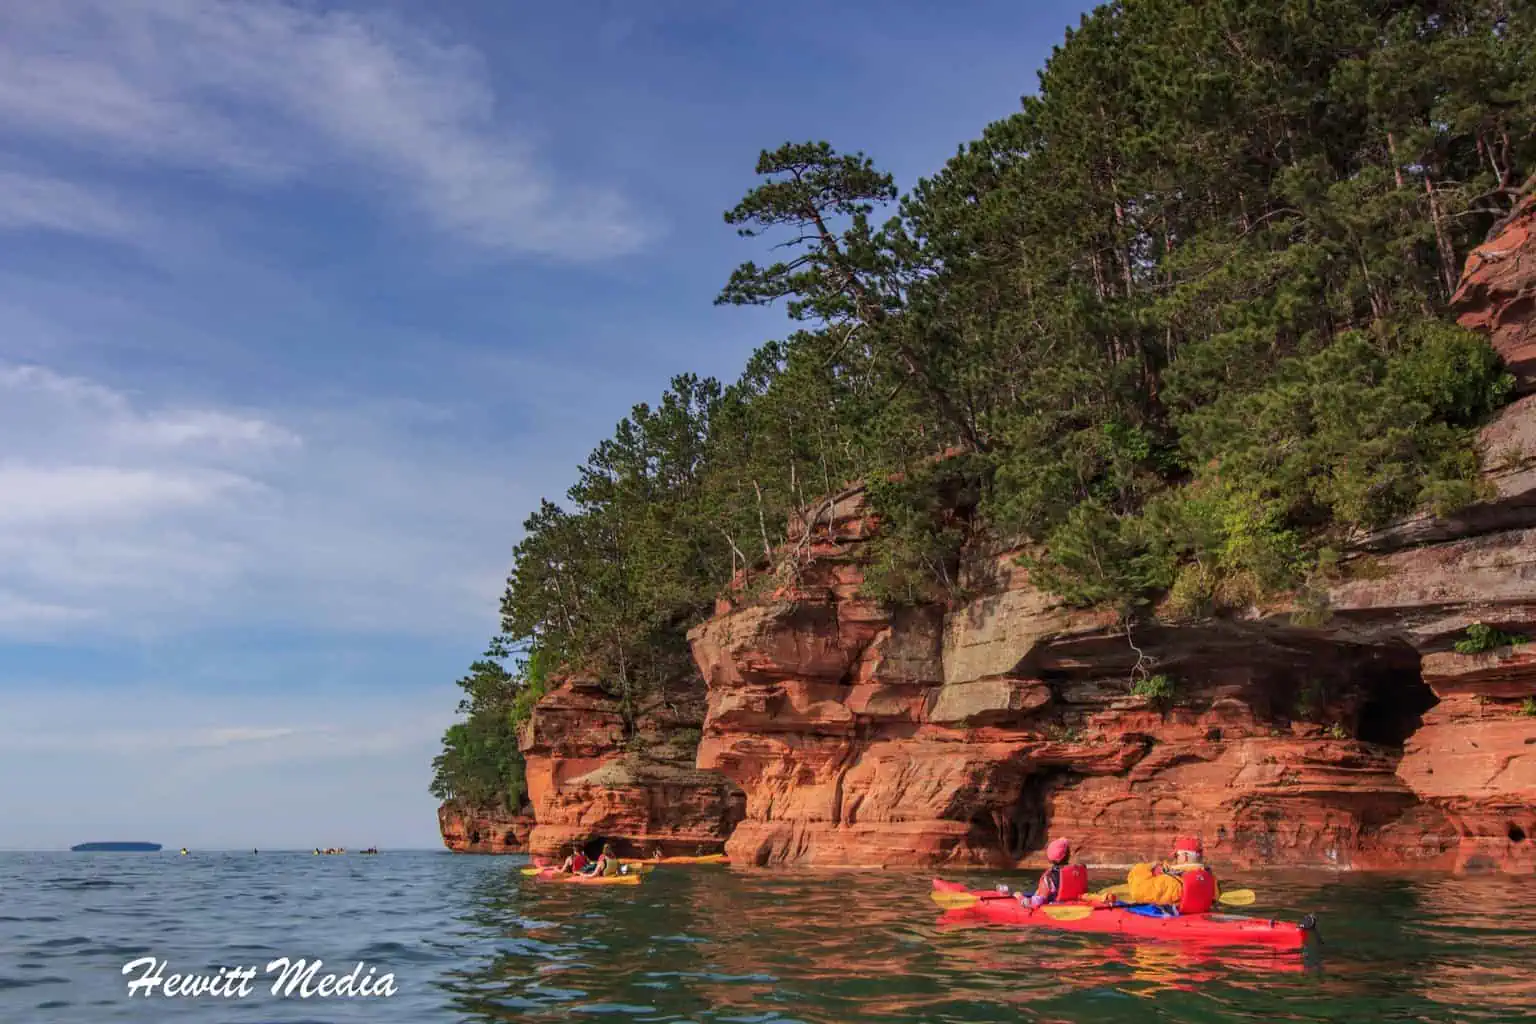 An All You Need Apostle Islands Visitor Guide